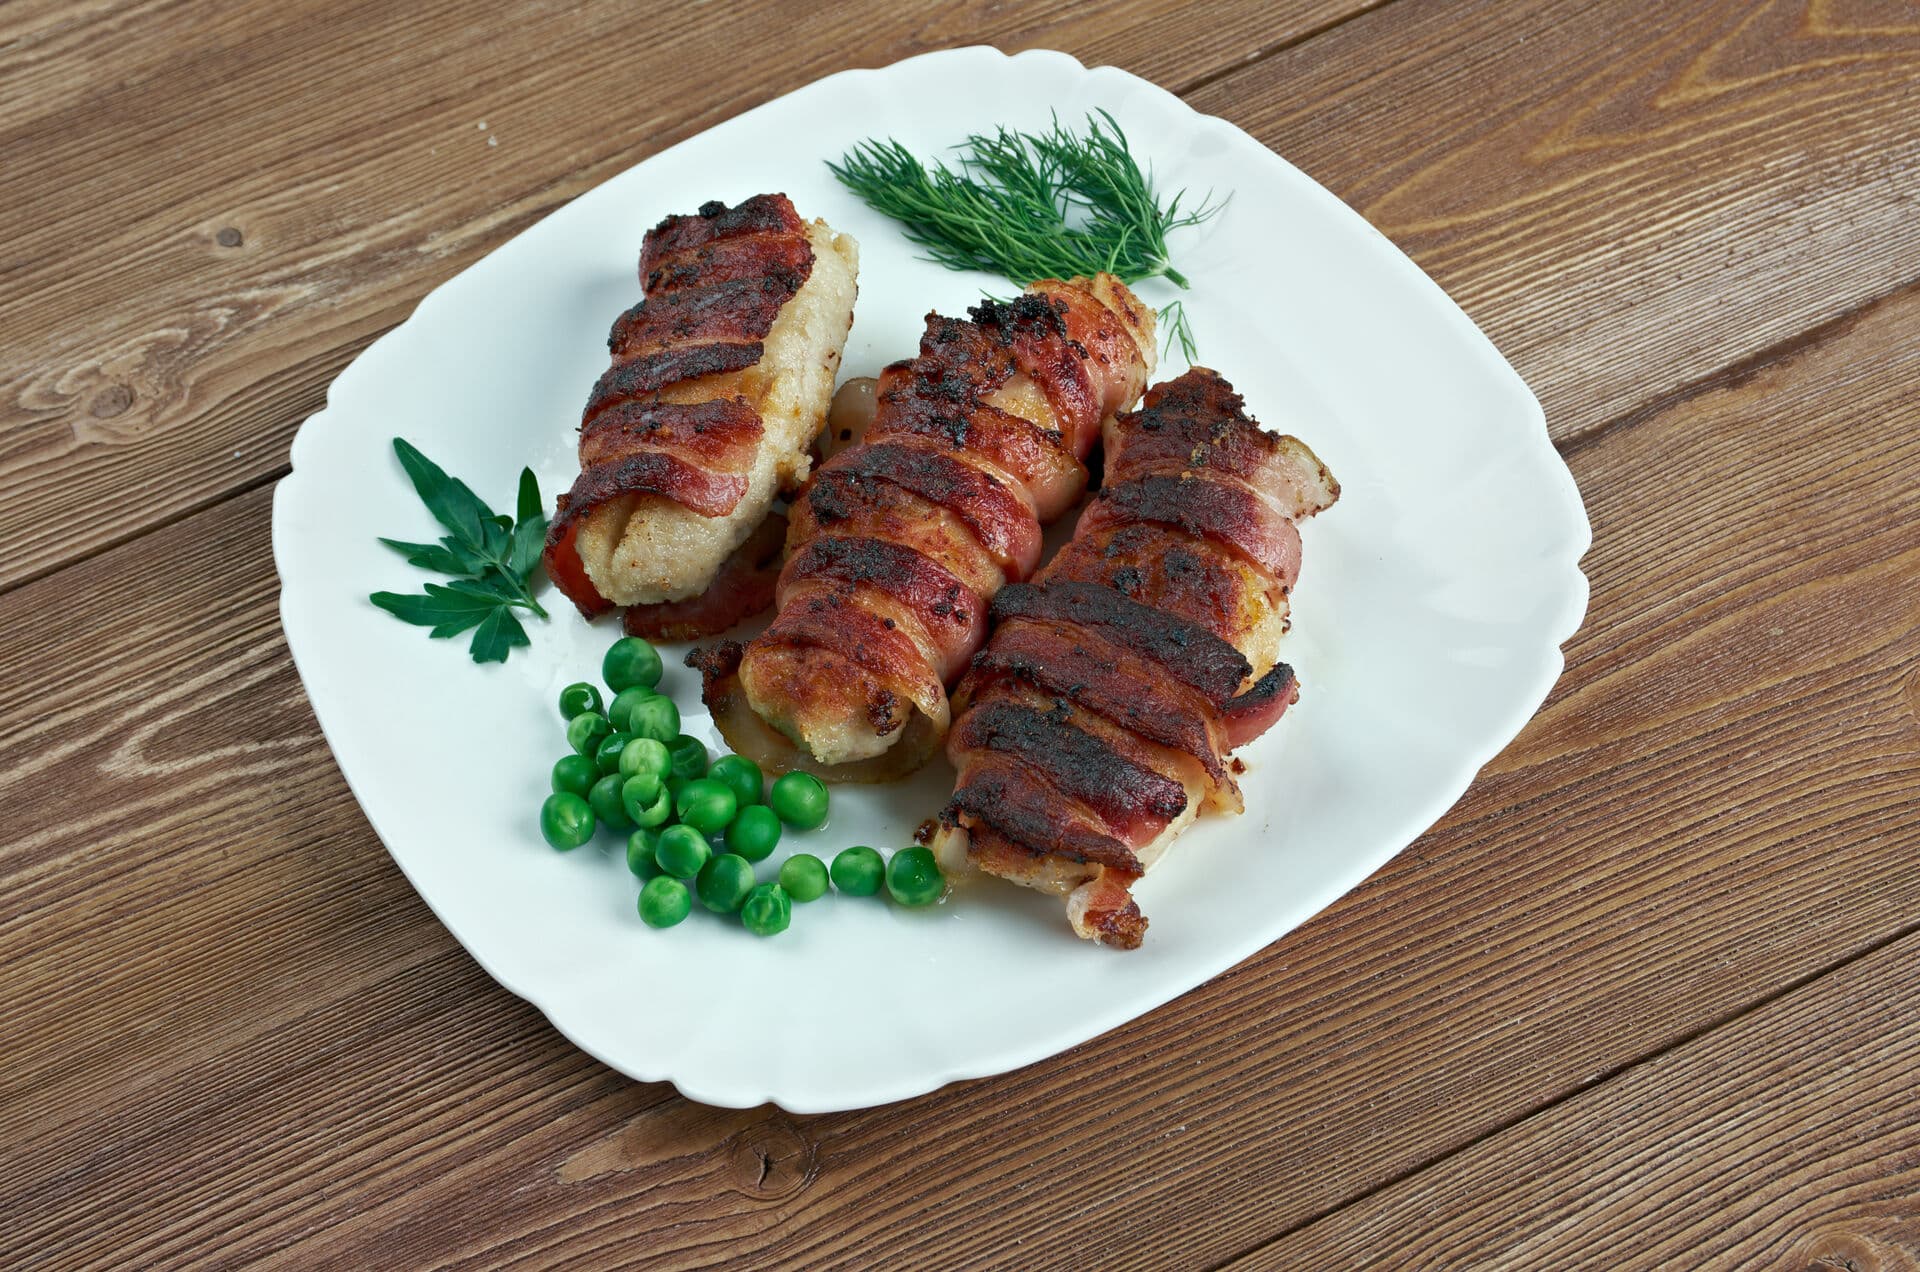 Slavink- Dutch meat dish.consisting of ground meat called half beef, half pork wrapped in bacon